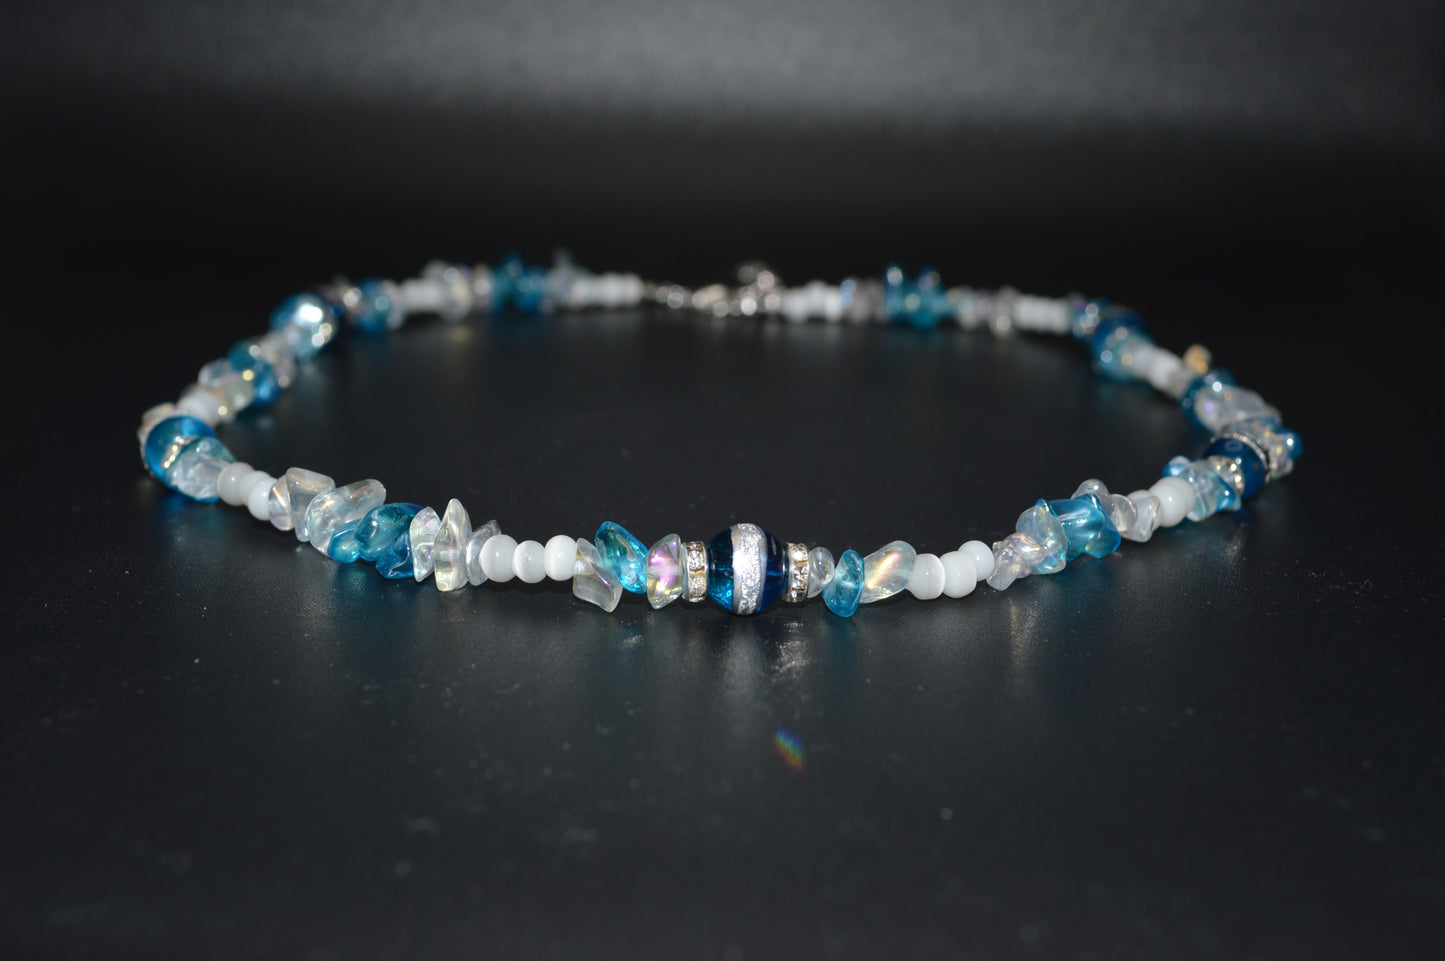 Blue Silver Striped Glass Beads with Glass Chips and Crystal Spacers Necklace